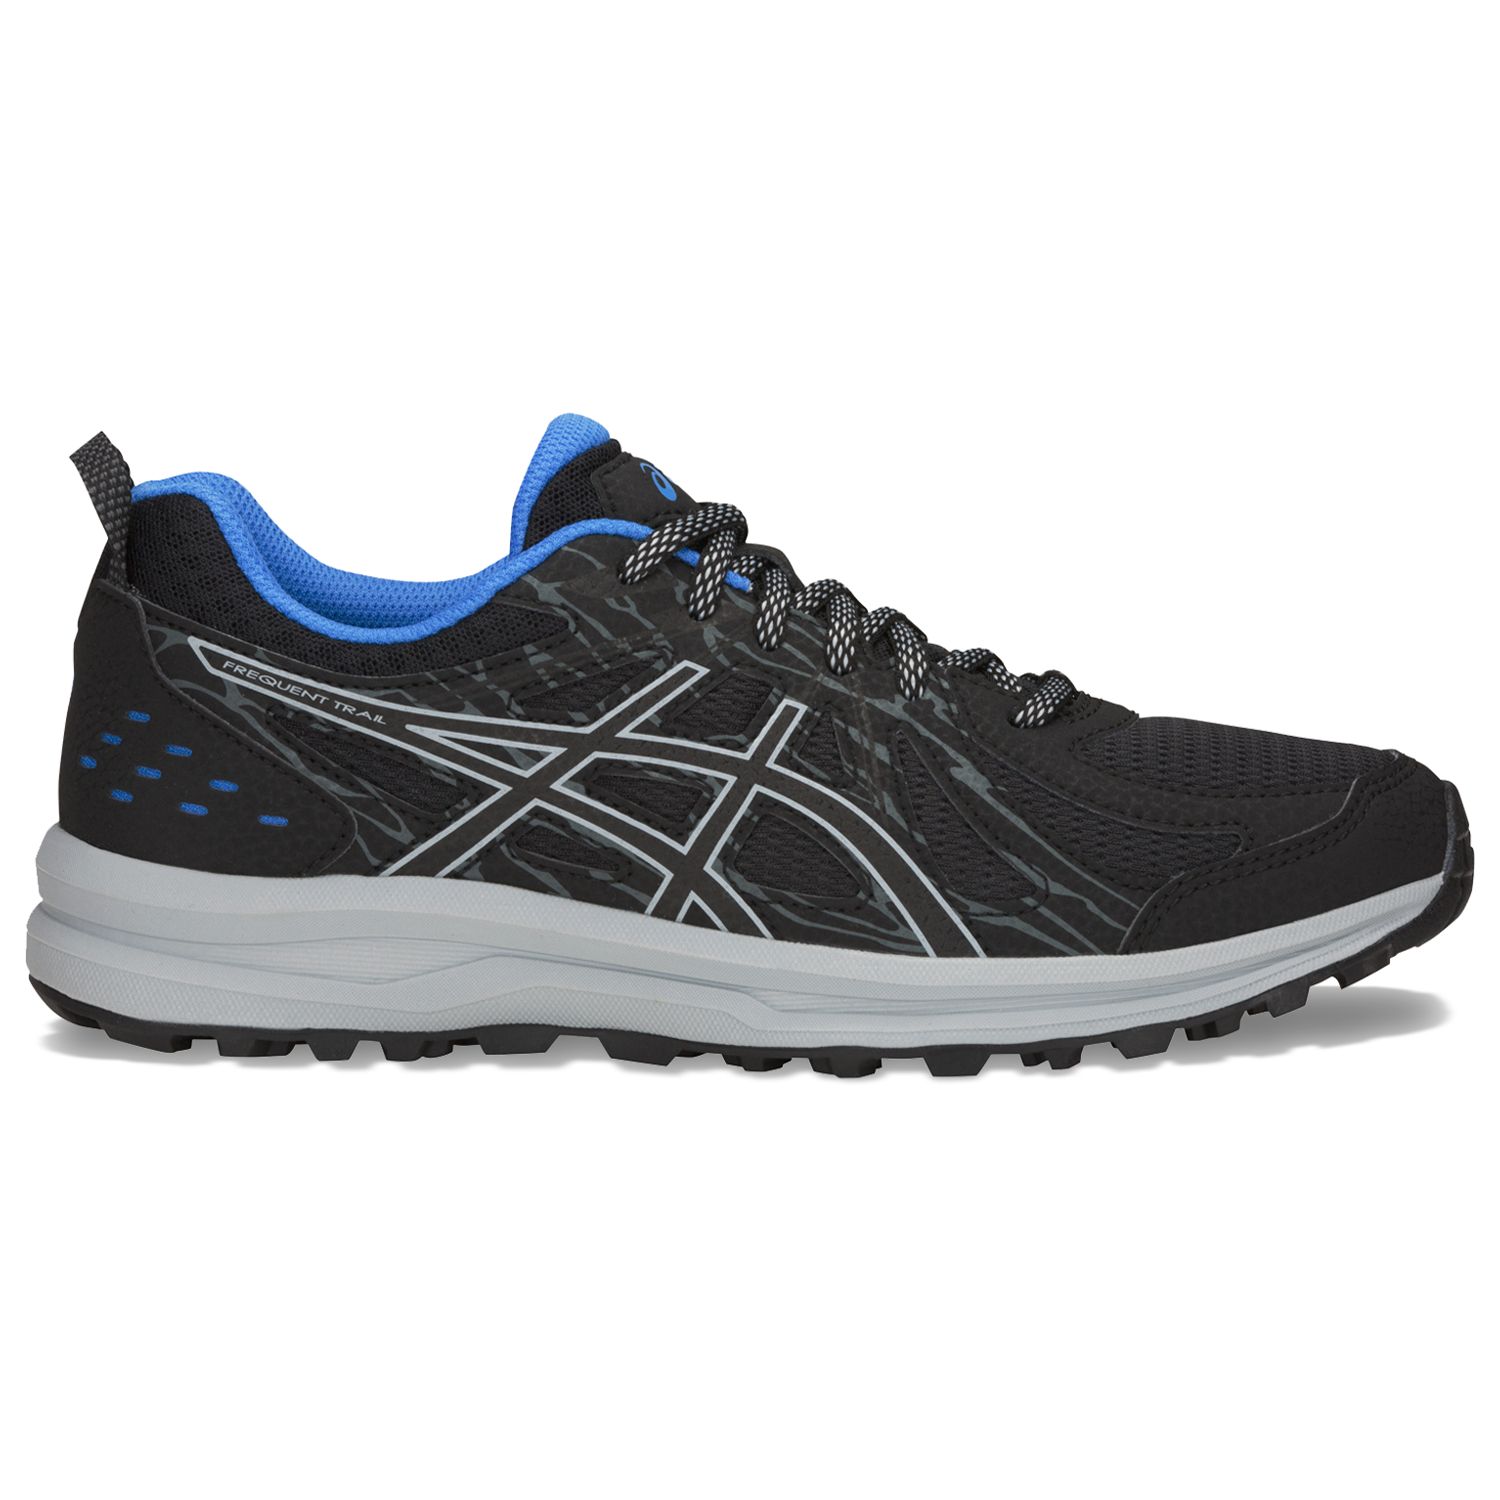 asics frequent trail women